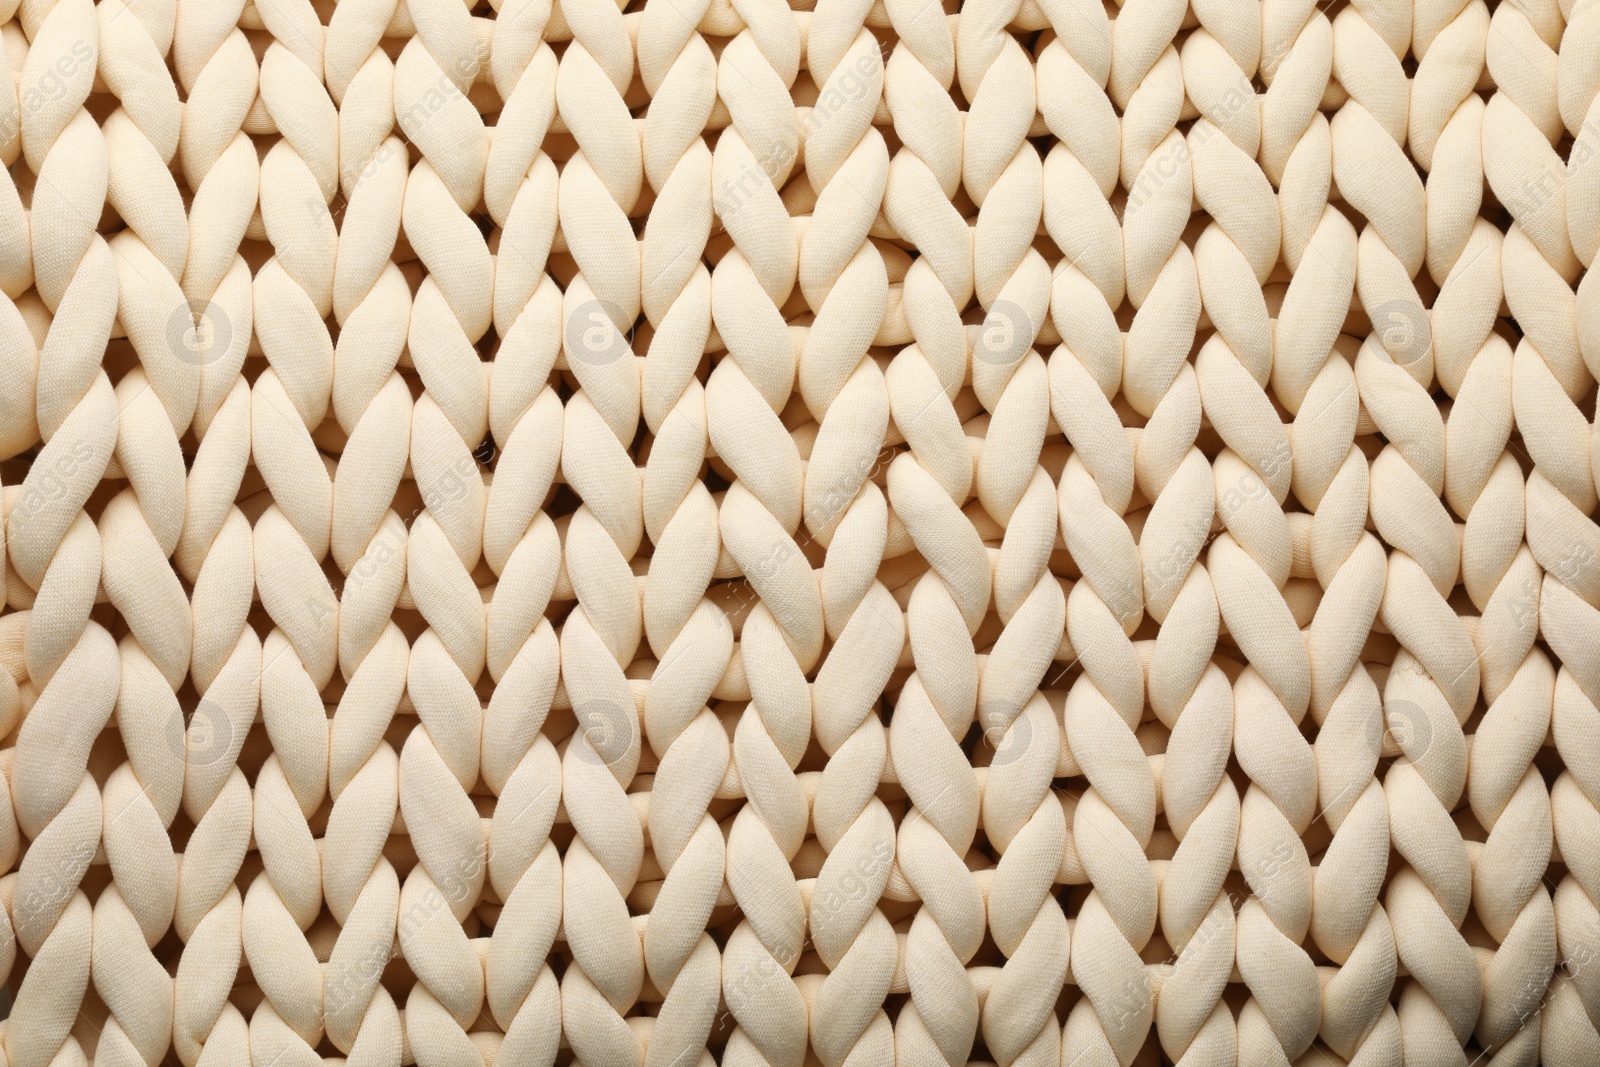 Photo of Chunky knit blankets as background, top view